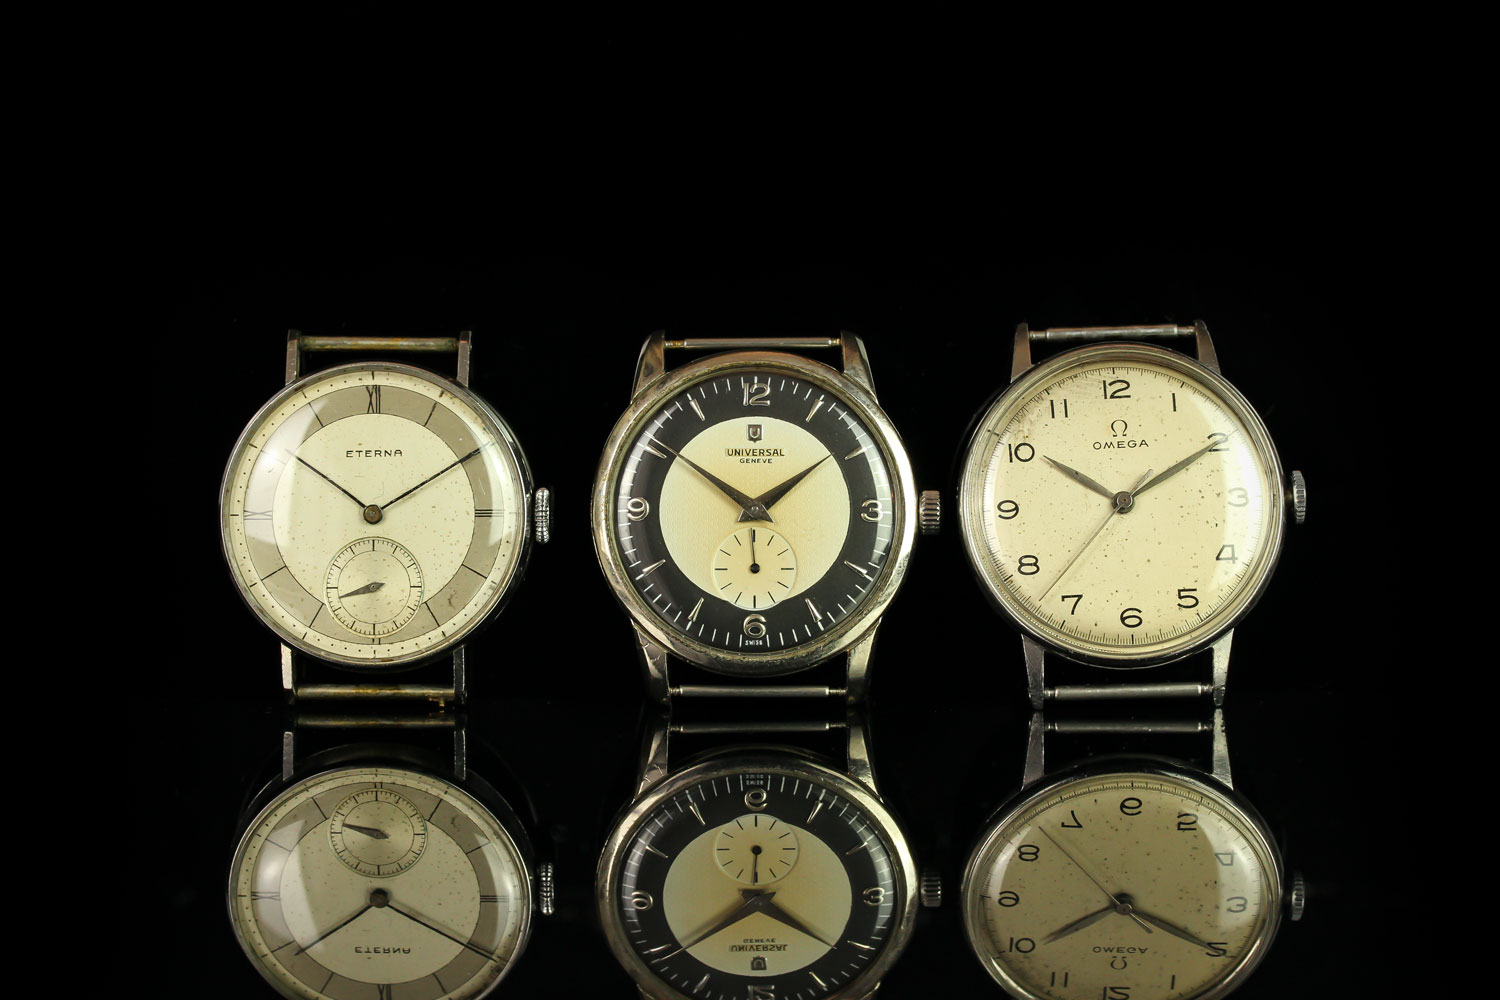 GROUP OF THREE WATCHES INCL ETERNA OMEGA UNIVERSAL GENEVE, Eterna, circular two tone sector dial